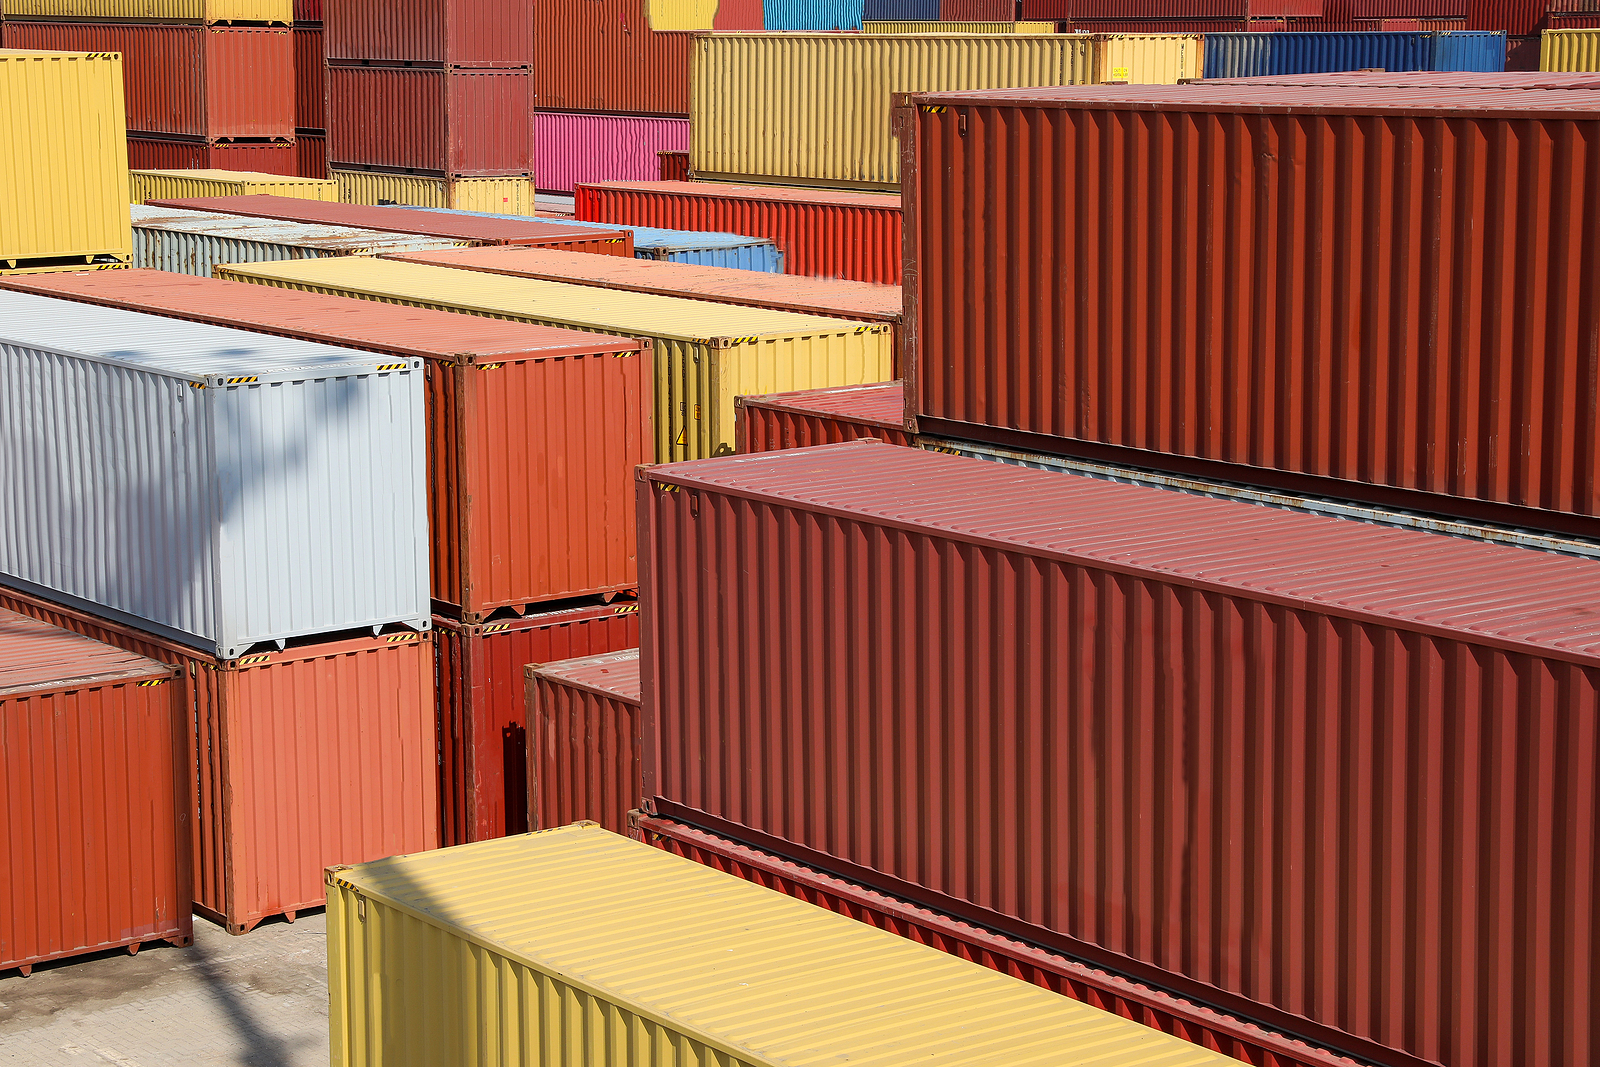 Stack Of Containers In A Harbor. Freight Containers Are Used For